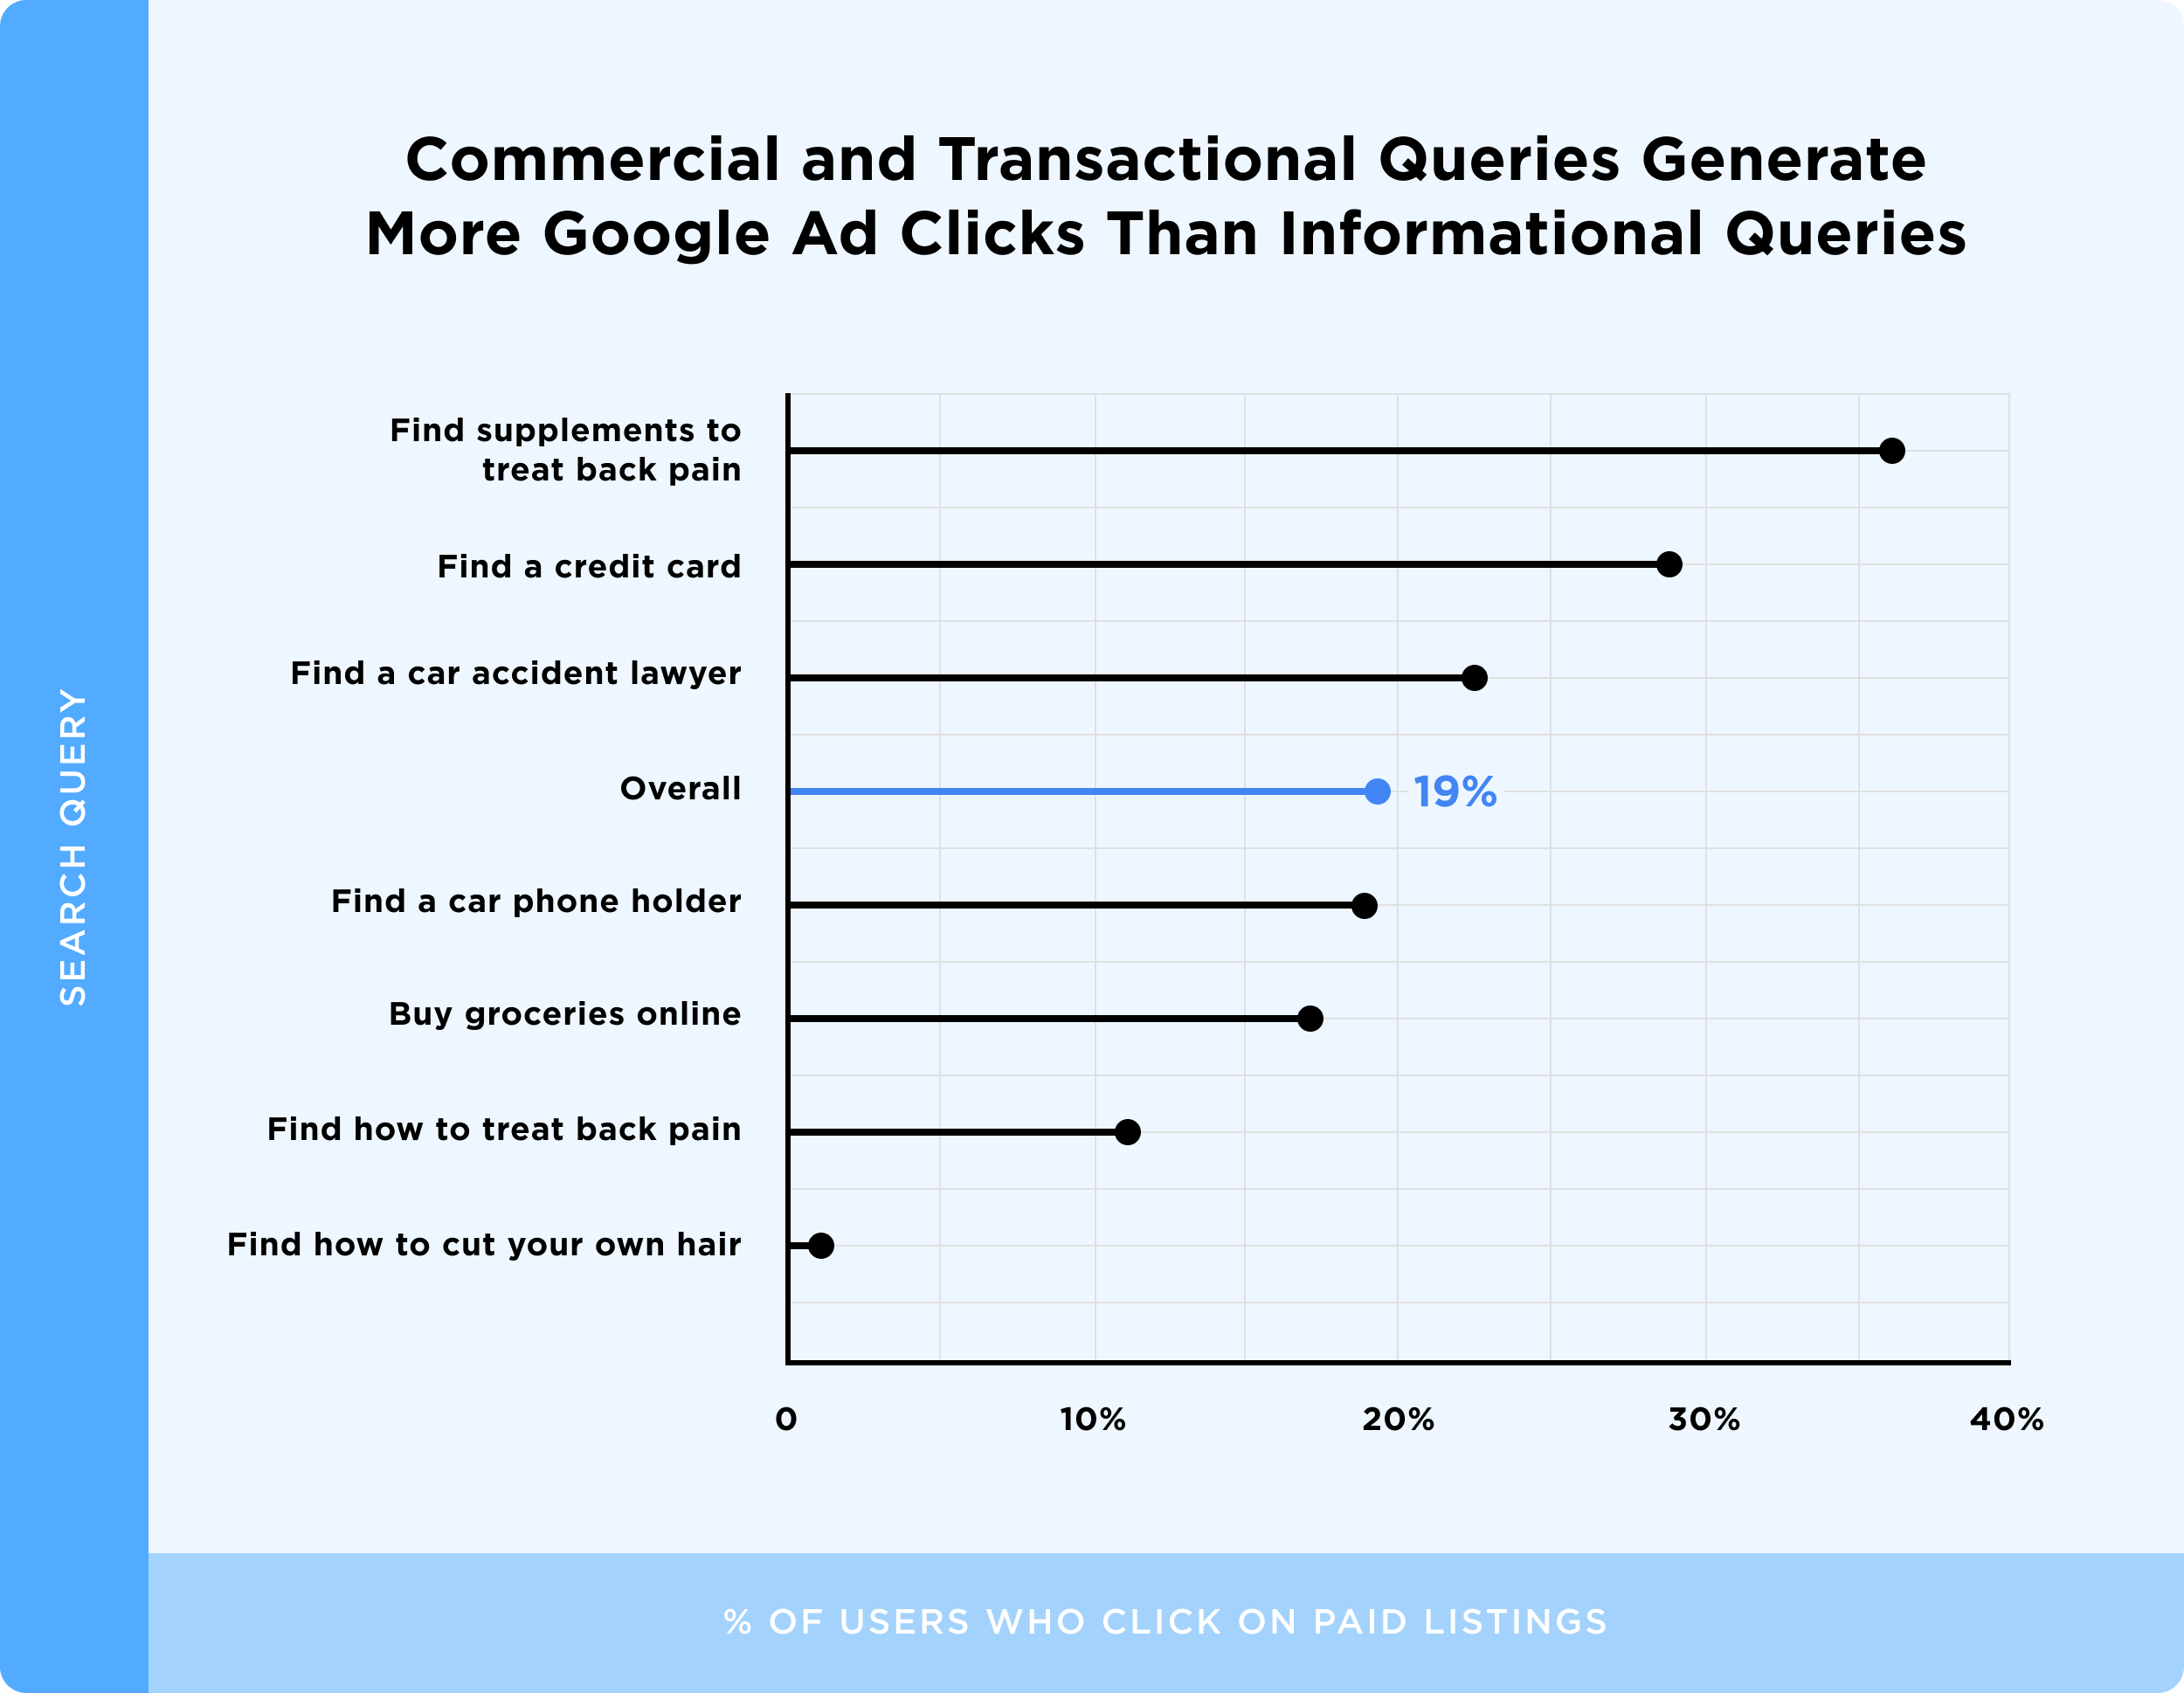 Commercial and Transactional Queries Generate More Google Ad Clicks Than Informational Queries